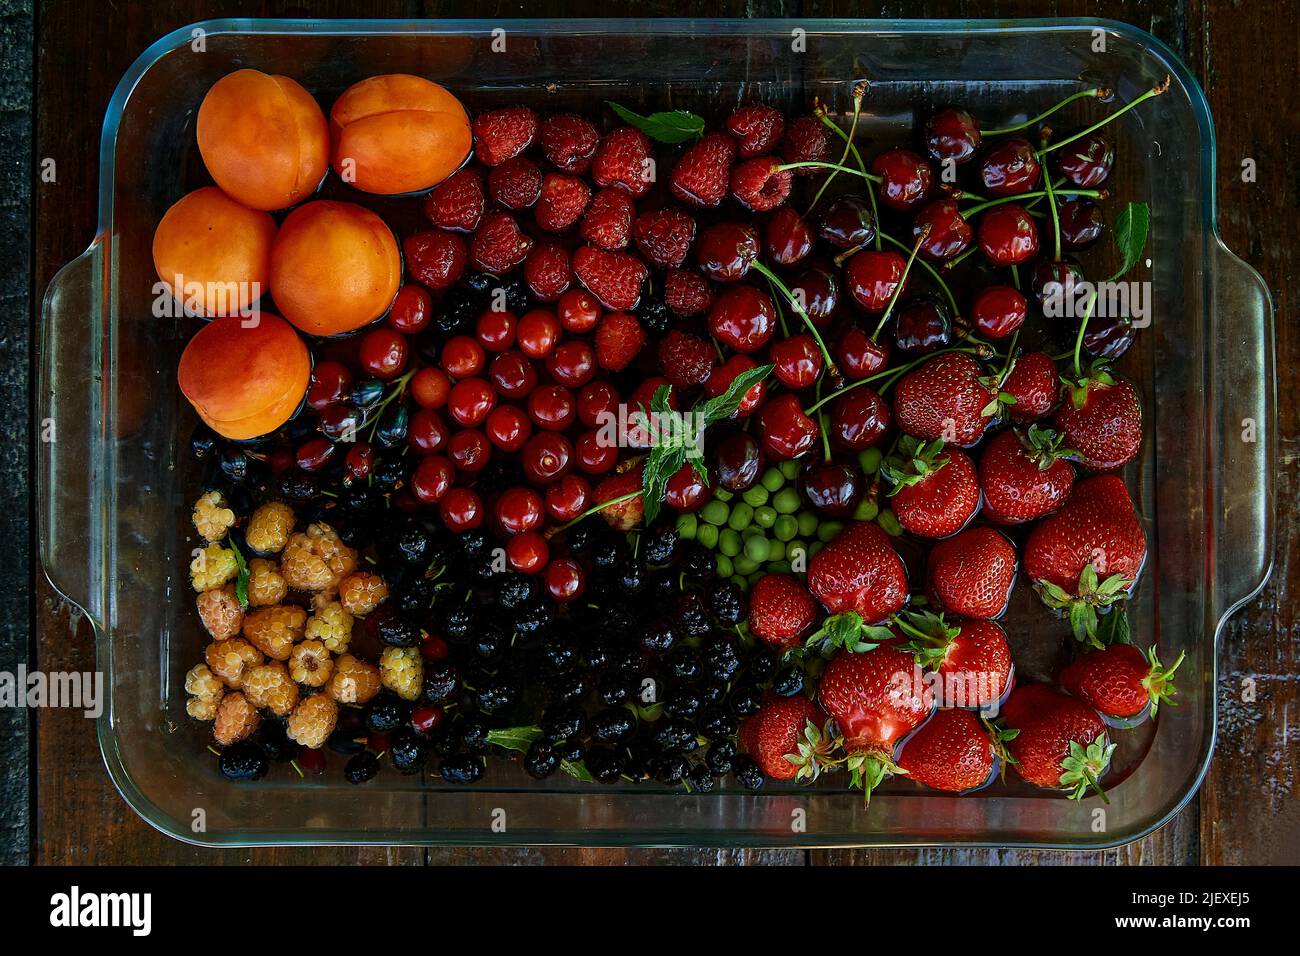 Assorty of fresh seasonal fruits and berries: strawberries, apricots, cherries, mulberry, raspberry washing under natural light. Healthy food, natural dessert, organic food. Stock Photo